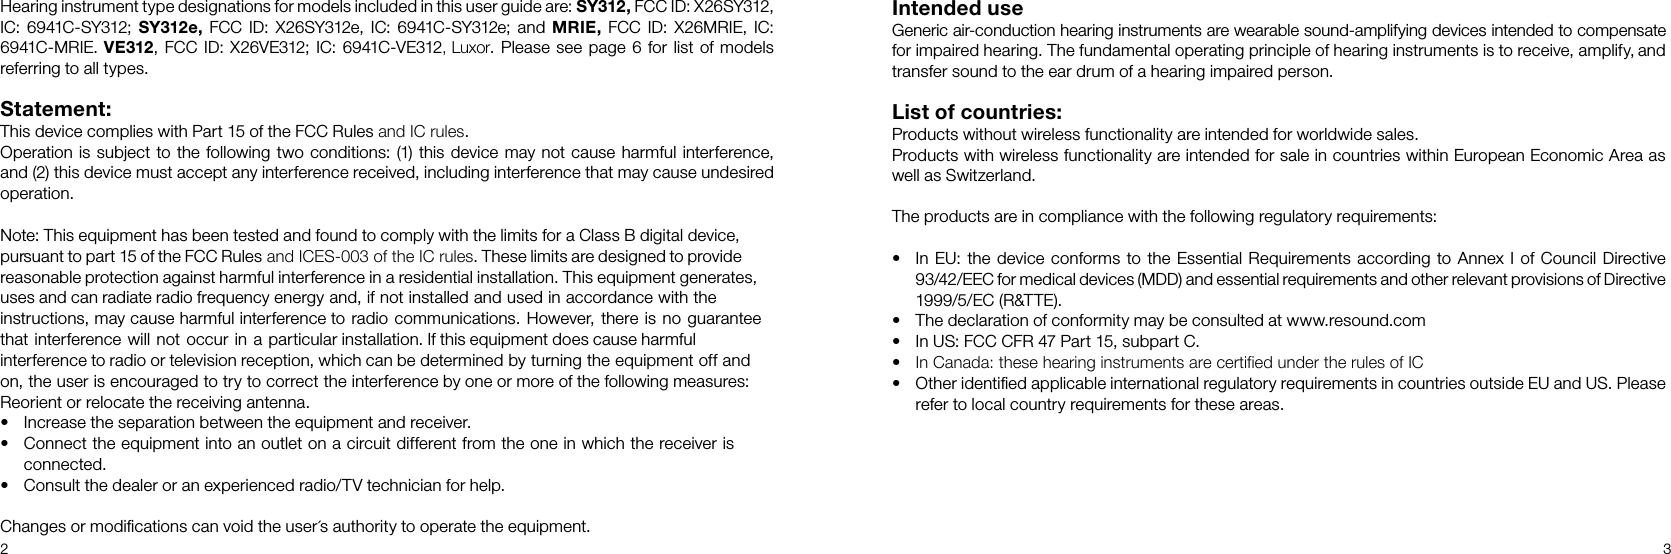 2 3´Hearing instrument type designations for models included in this user guide are: SY312, FCC ID: X26SY312,IC: 6941C-SY312; SY312e, FCC ID: X26SY312e, IC: 6941C-SY312e; and MRIE, FCC ID: X26MRIE, IC:6941C-MRIE. VE312, FCC ID: X26VE312; IC: 6941C-VE312, Luxor. Please see page 6 for list of models referring to all types.Statement:This device complies with Part 15 of the FCC Rules and IC rules.Operation is subject to the following two conditions: (1) this device may not cause harmful inter ference,and (2) this device must accept any interference received, including interference that may cause undesiredoperation.Note: This equipment has been tested and found to comply with the limits for a Class B digital device,pursuant to part 15 of the FCC Rules and ICES-003 of the IC rules. These limits are designed to providereasonable protection against harmful interference in a residential installation. This equipment generates,uses and can radiate radio frequency energy and, if not installed and used in accordance with theinstructions, may cause harmful interference to radio communications. However, there is no guaranteethat interference will not occur in a particular installation. If this equipment does cause harmfulinterference to radio or television reception, which can be determined by turning the equipment off andon, the user is encouraged to try to correct the interference by one or more of the following measures:Reorient or relocate the receiving antenna.• Increase the separation between the equipment and receiver.• Connect the equipment into an outlet on a circuit different from the one in which the receiver isconnected.• Consult the dealer or an experienced radio/TV technician for help.Changes or modiﬁcations can void the user s authority to operate the equipment.Intended use Generic air-conduction hearing instruments are wearable sound-amplifying devices intended to compensate for impaired hearing. The fundamental operating principle of hearing instruments is to receive, amplify, and transfer sound to the ear drum of a hearing impaired person. List of countries: Products without wireless functionality are intended for worldwide sales.Products with wireless functionality are intended for sale in countries within European Economic Area aswell as Switzerland.The products are in compliance with the following regulatory requirements: • In EU: the device conforms to the Essential Requirements according to Annex I of Council Directive93/42/EEC for medical devices (MDD) and essential requirements and other relevant provisions of Directive1999/5/EC (R&amp;TTE). • The declaration of conformity may be consulted at www.resound.com• In US: FCC CFR 47 Part 15, subpart C.•In Canada: these hearing instruments are certified under the rules of IC•Other identiﬁed applicable international regulatory requirements in countries outside EU and US. Pleaserefer to local country requirements for these areas.